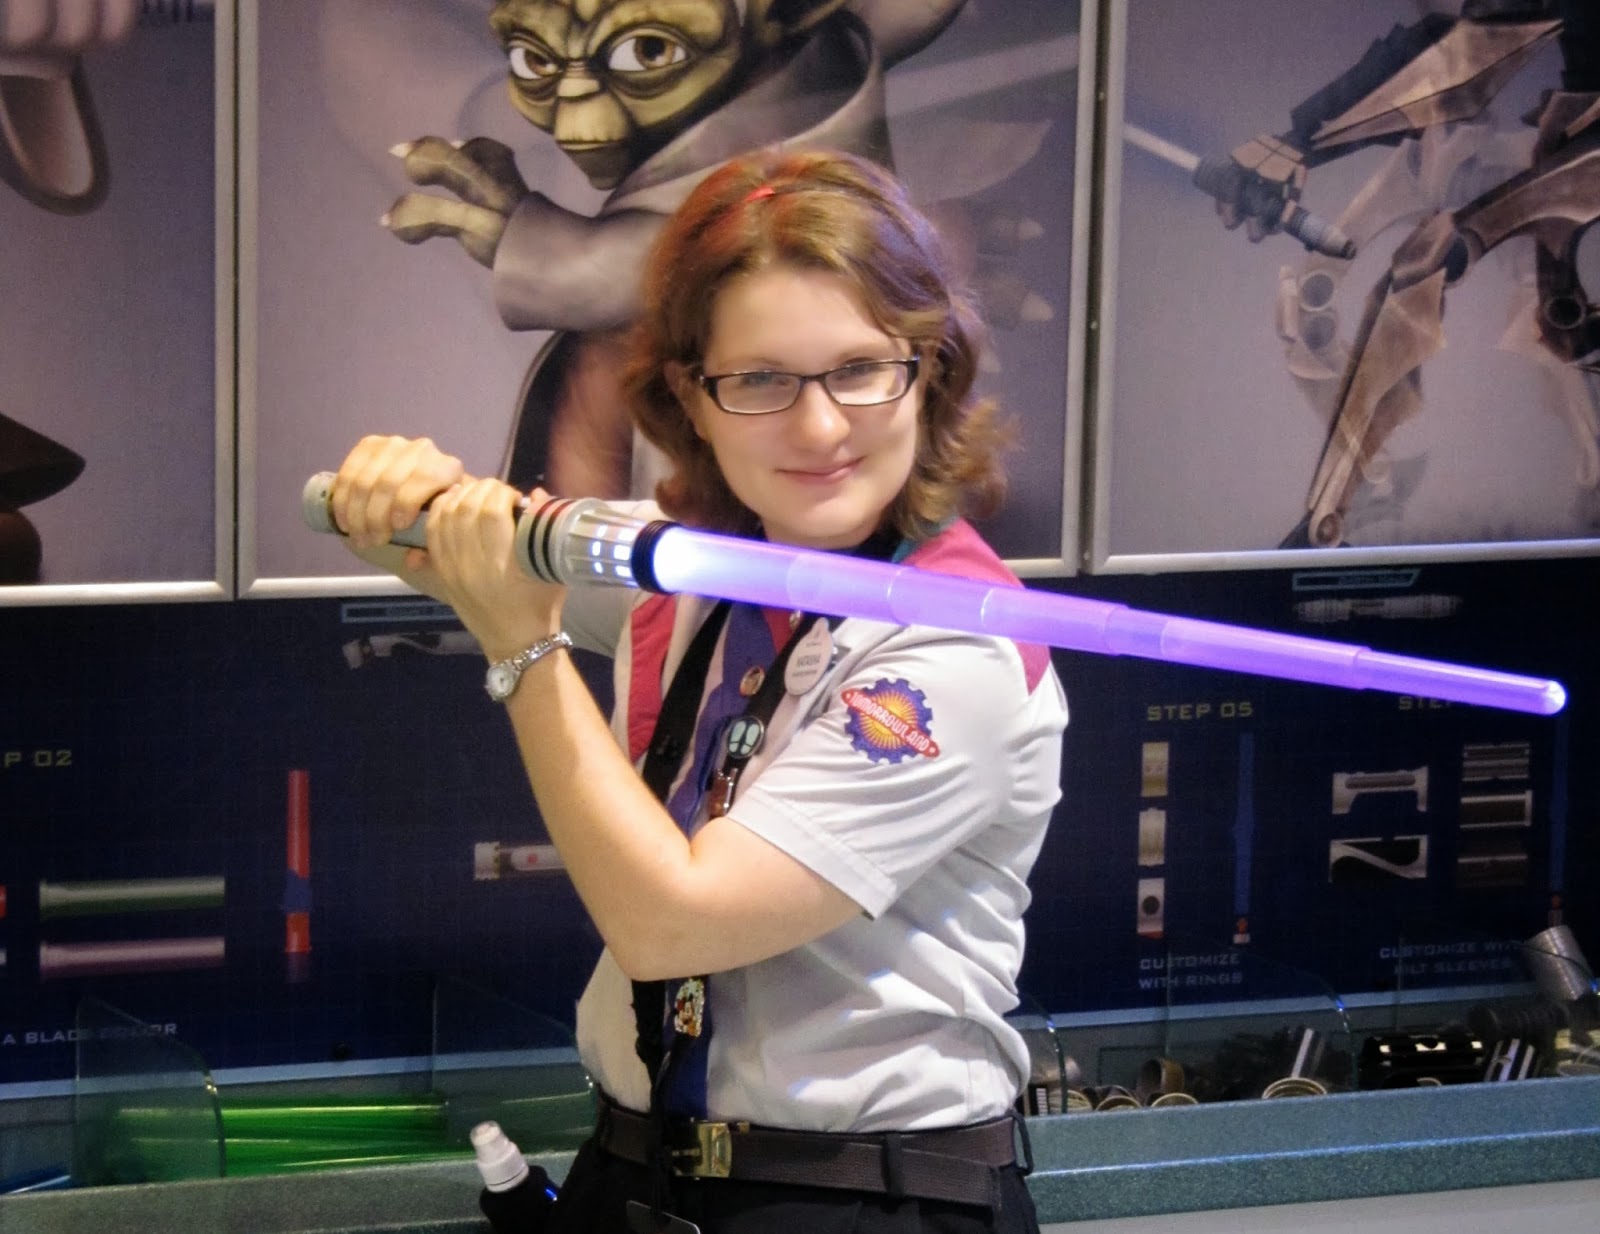 Natasha's Nickelodeon: The 'Build Your Own Lightsaber' Station